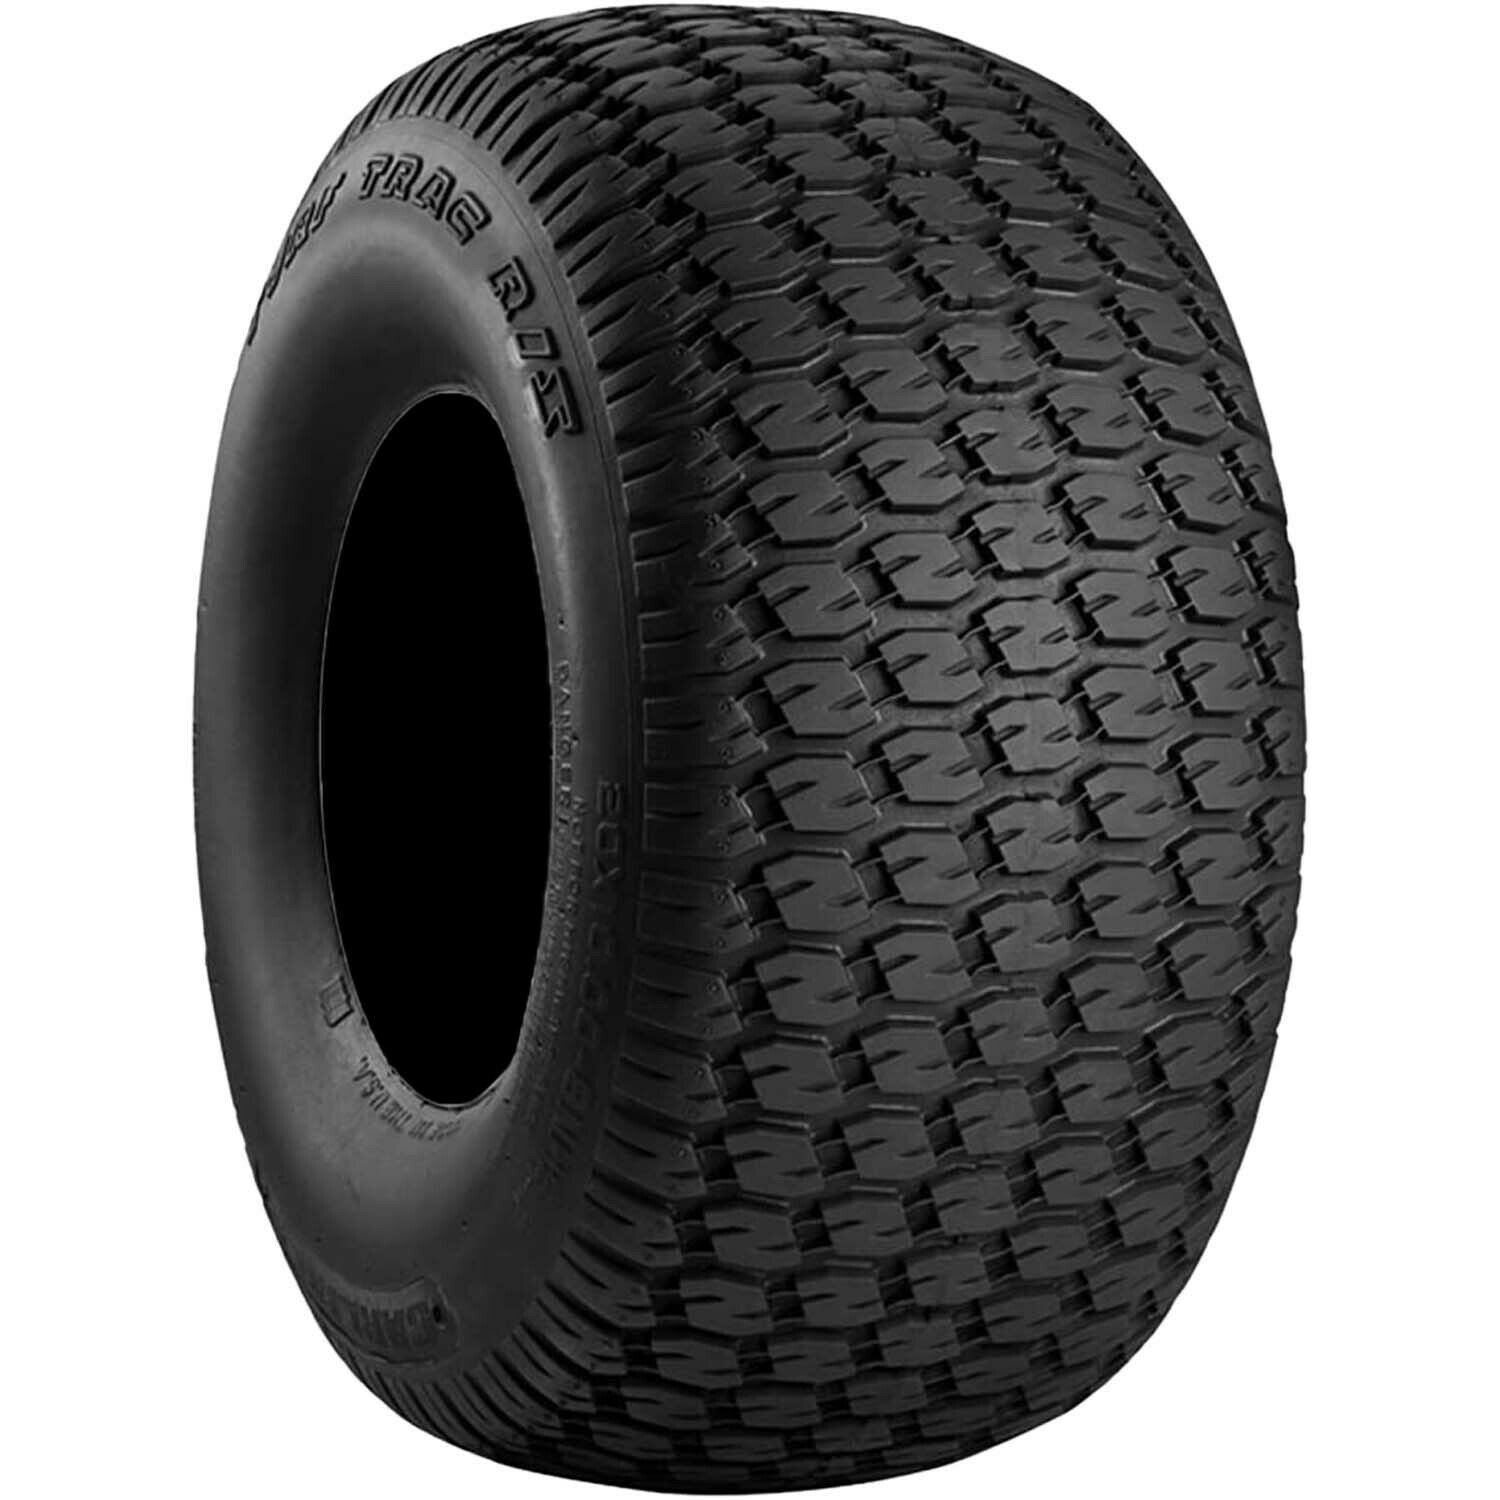 Carlisle Turf Trac R/S Lawn and Garden Tire 4ply 24x9.50-10